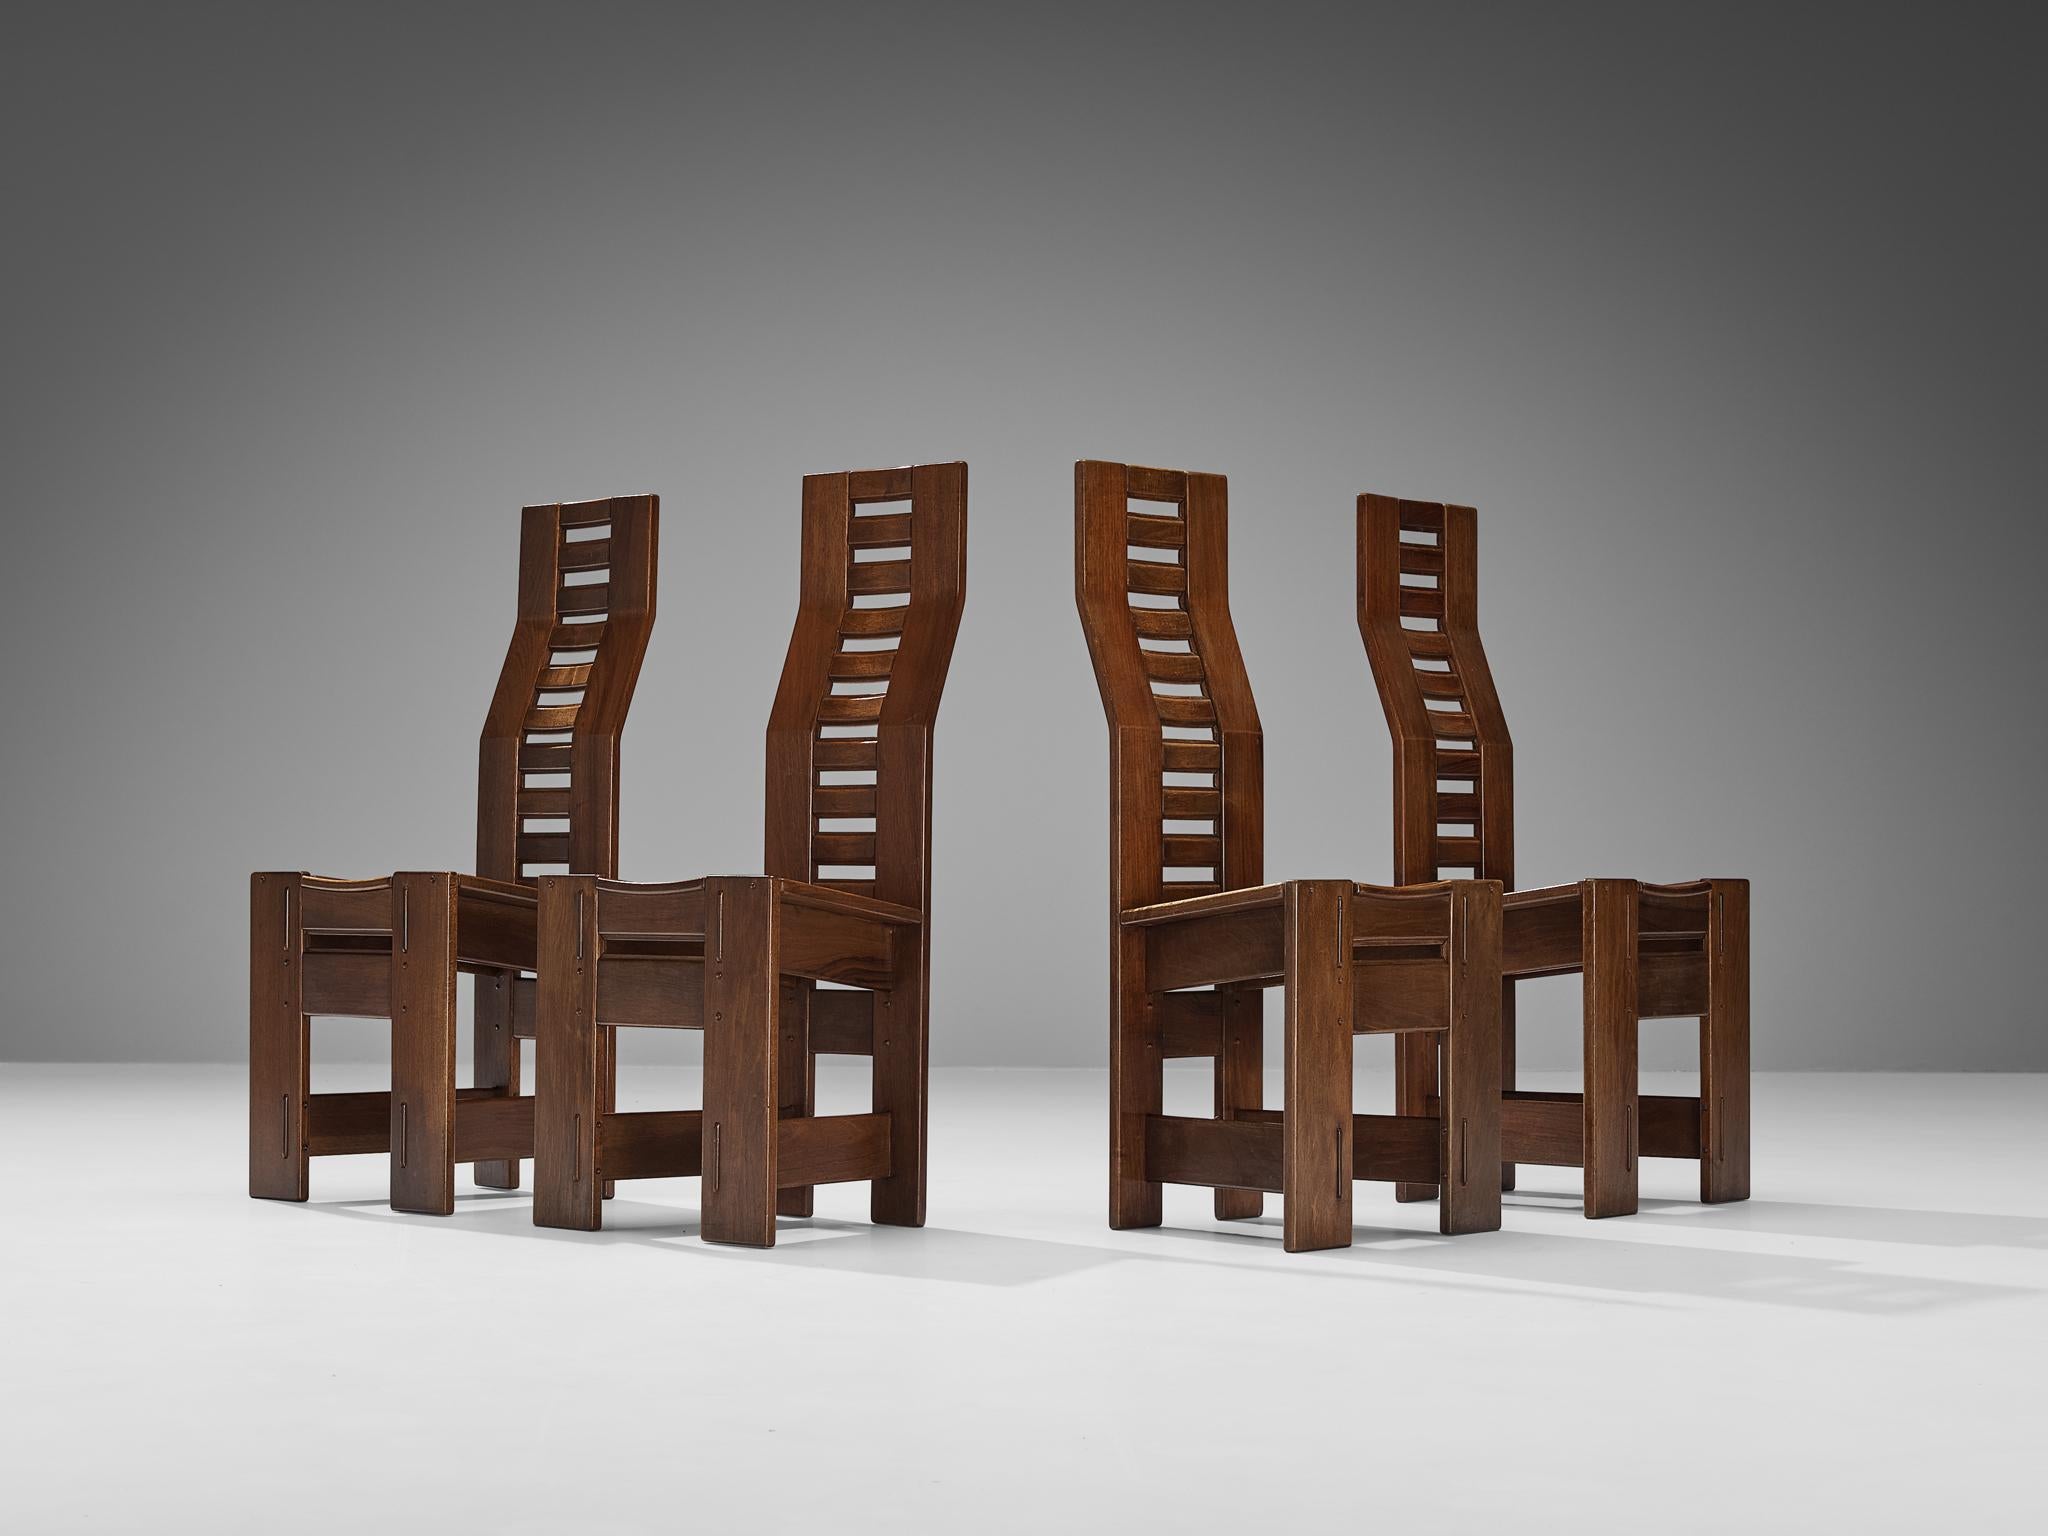 Giuseppe Rivadossi for Officina Rivadossi, set of four dining chairs, walnut, Italy, circa 1980

An exceptional set of chairs by the Italian sculptor and designer Giuseppe Rivadossi, featuring a high level of craftsmanship in woodwork. The chairs